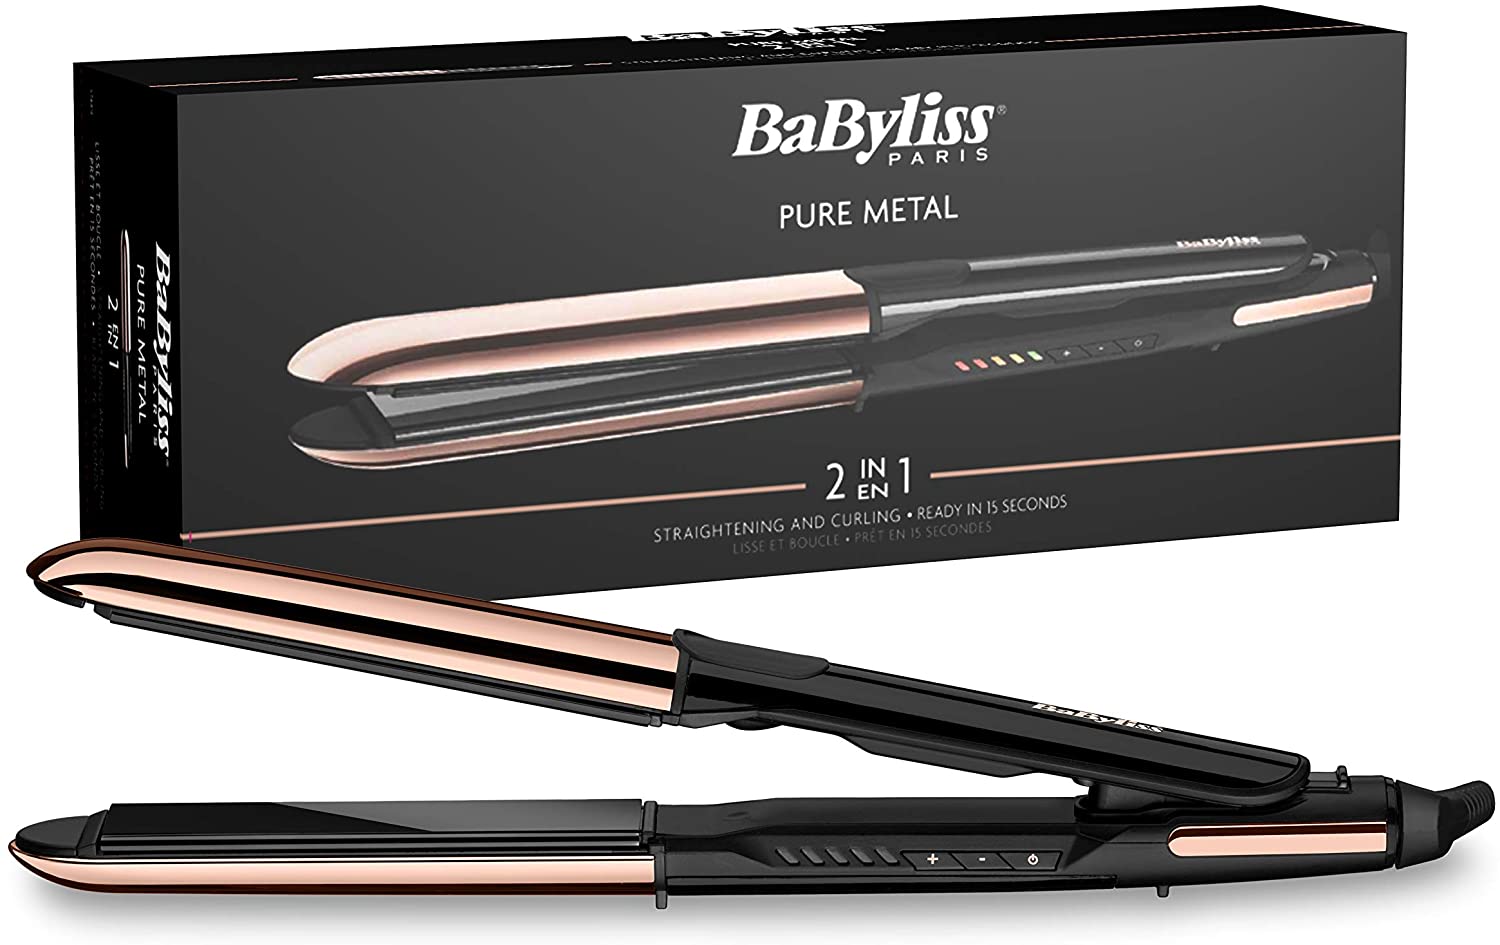 BaByliss Piastra Lisciante 2 in 1